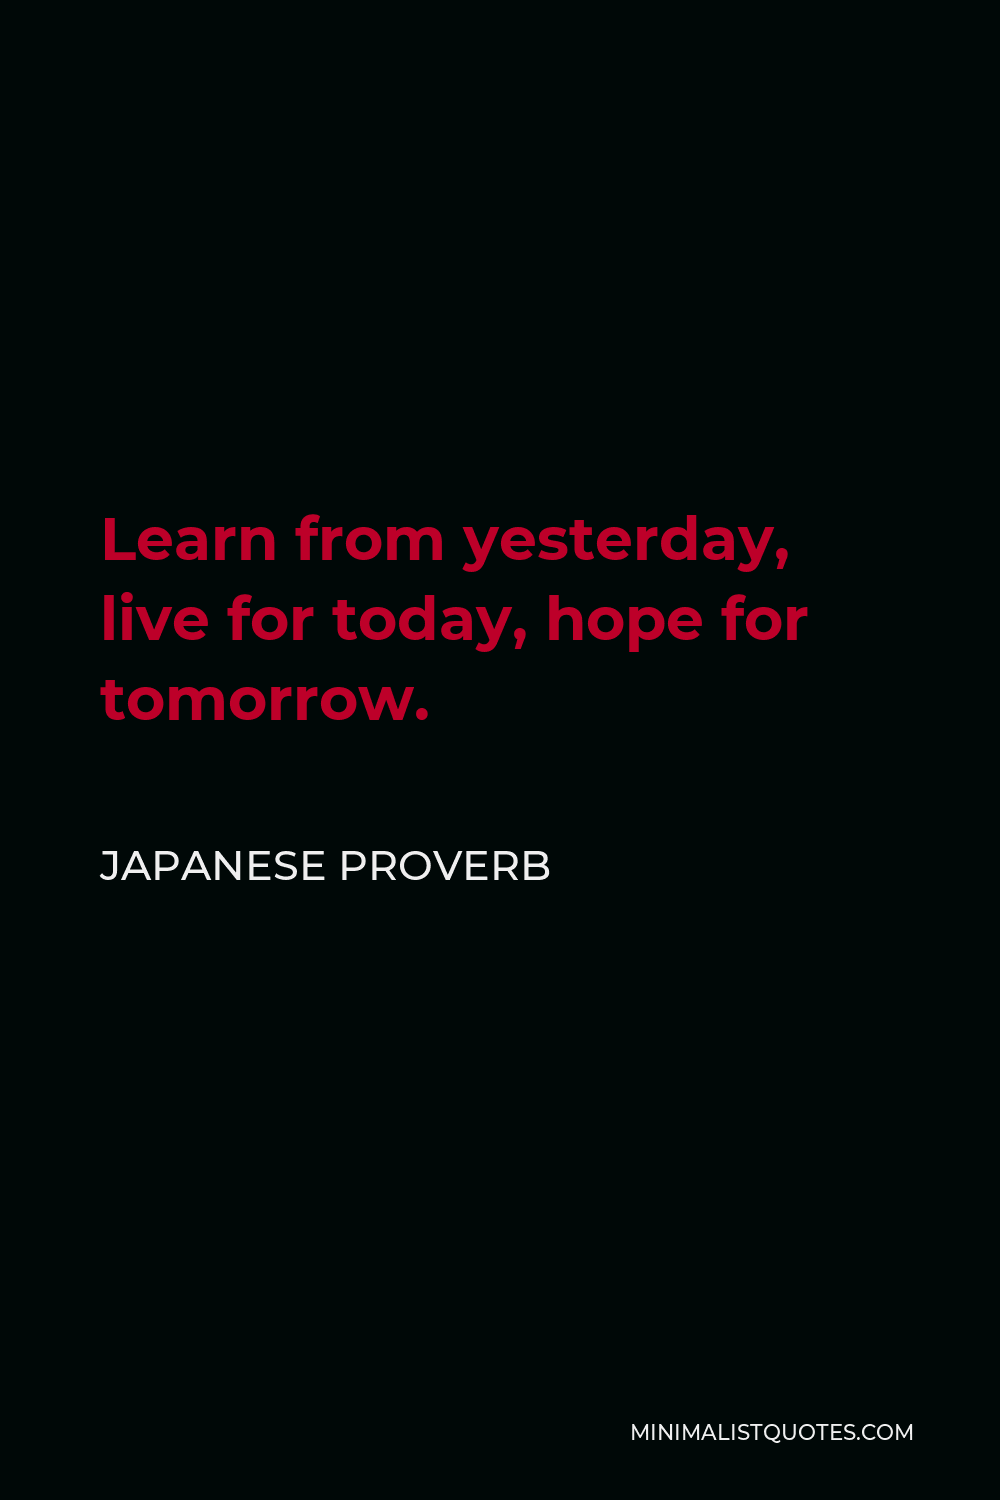 Japanese Proverb Quote - Learn from yesterday, live for today, hope for tomorrow.